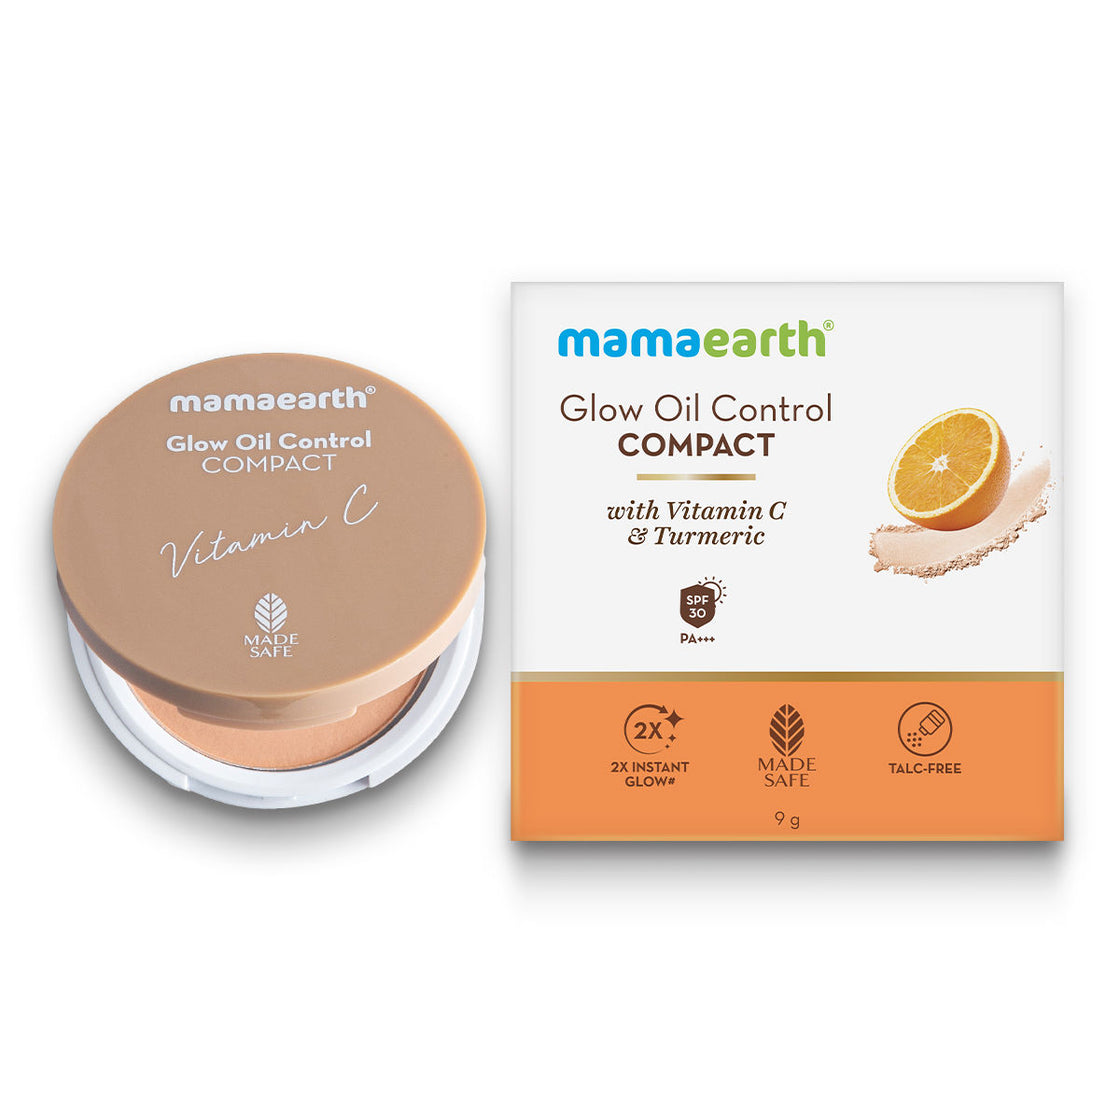 Mamaearth Glow Oil Control Compact Spf 30 With Vitamin C & Turmeric - 01 Ivory Glow-2